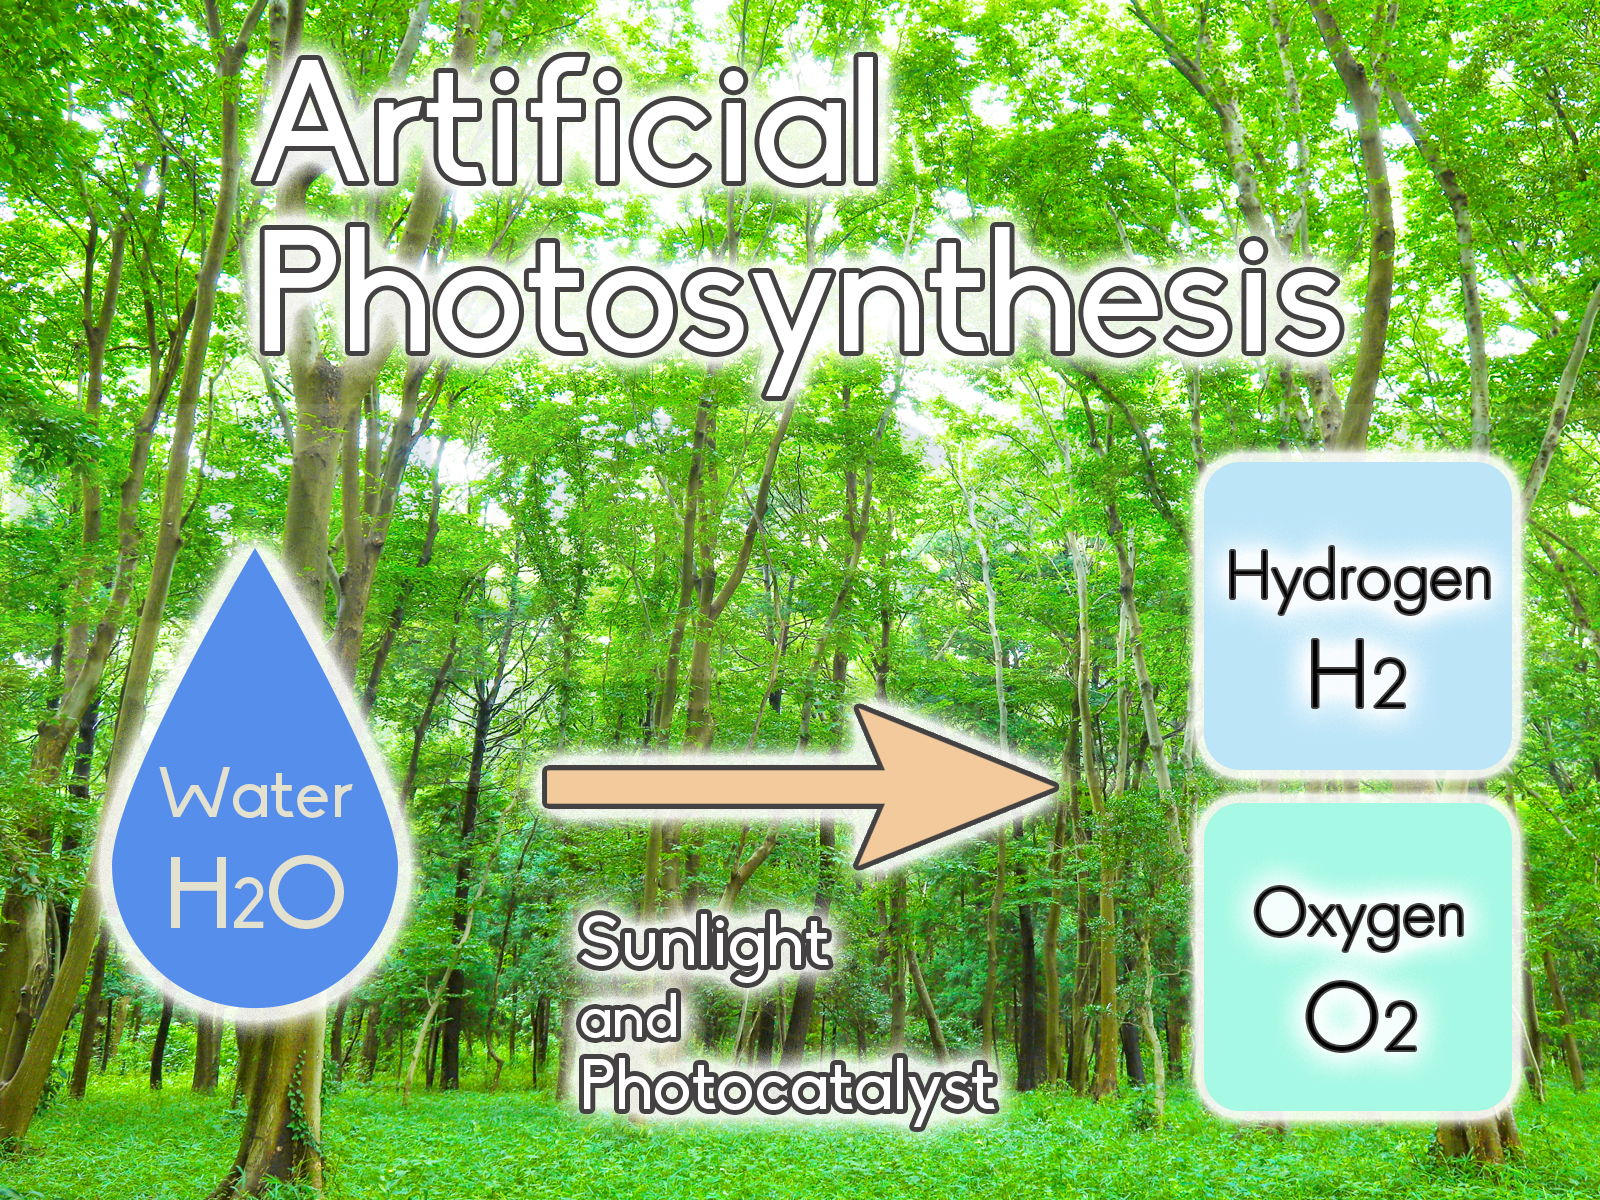 NEDO Succeeded in the world's first demonstration test to produce solar hydrogen on a scale of 100 m2 by artificial photosynthesis in Japan